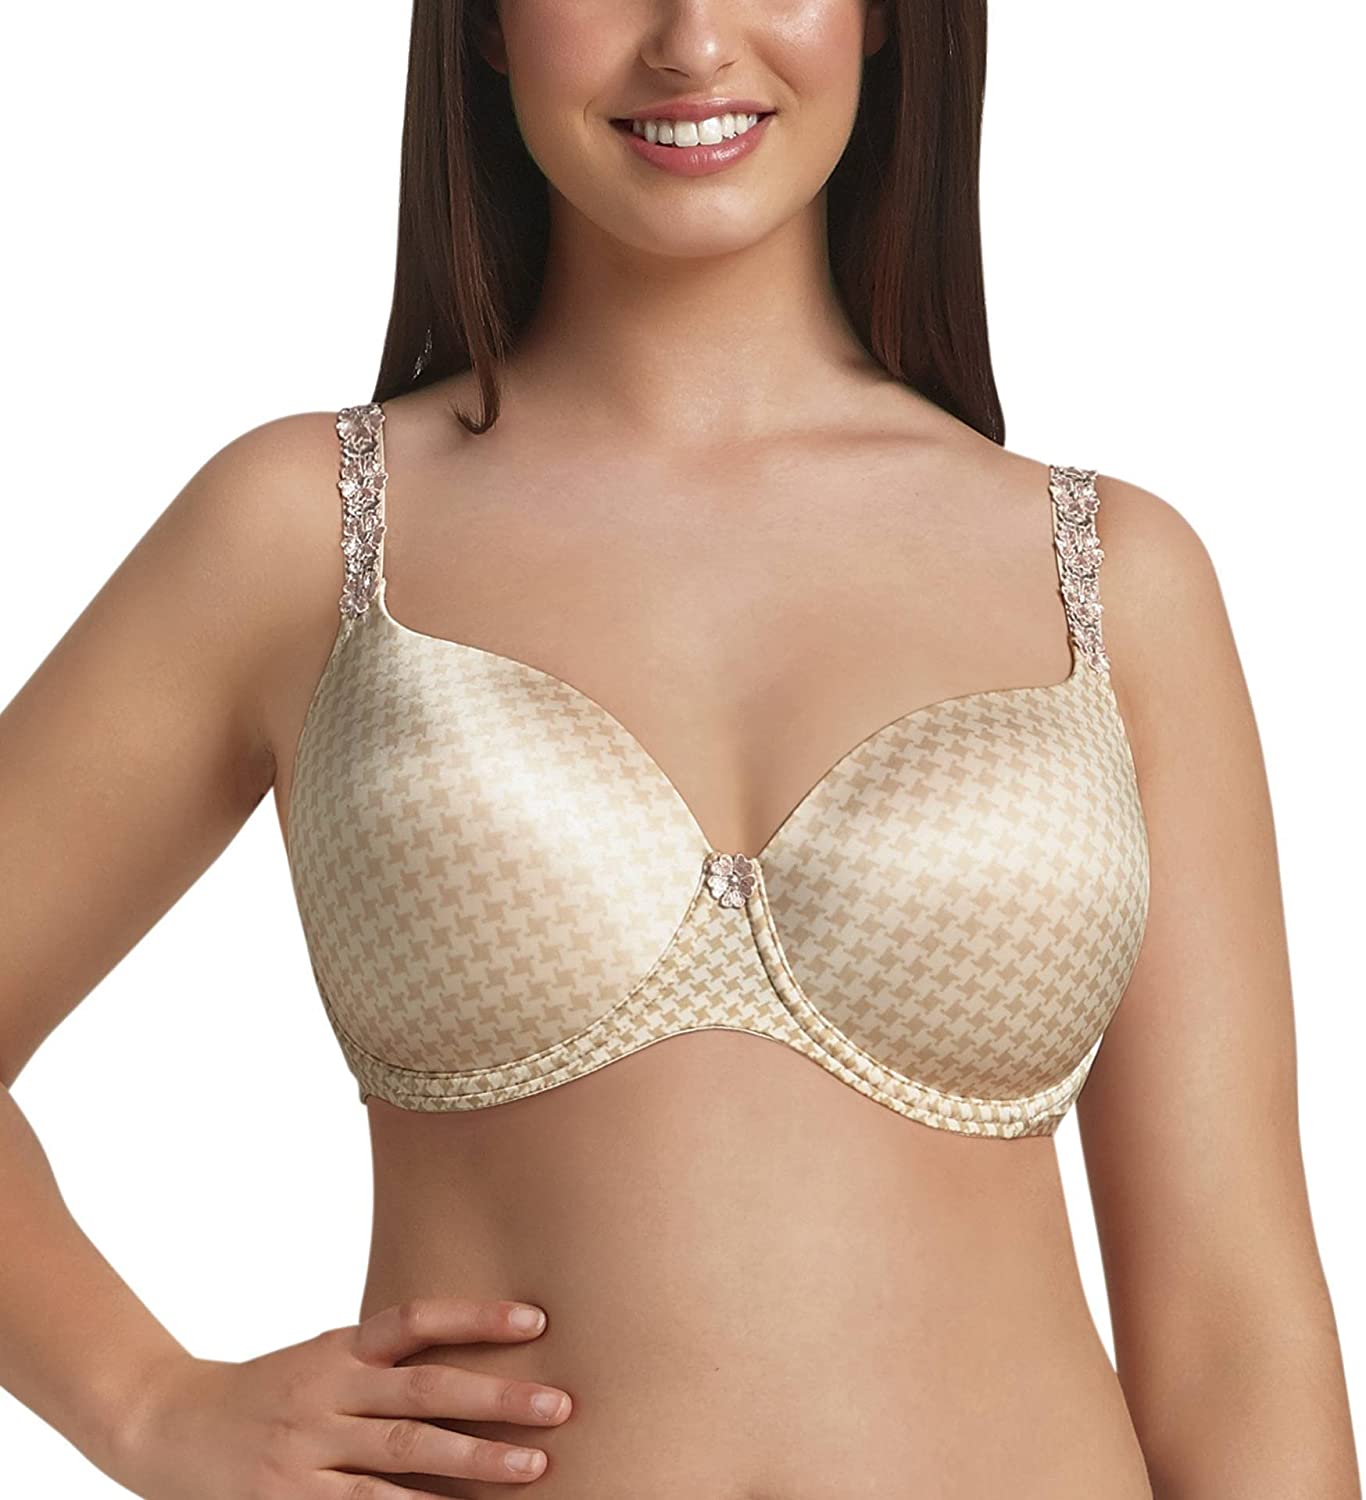 RosaFaia Josephine Womens Padded Contour Underwired Bra, 30D, Pearl Rose